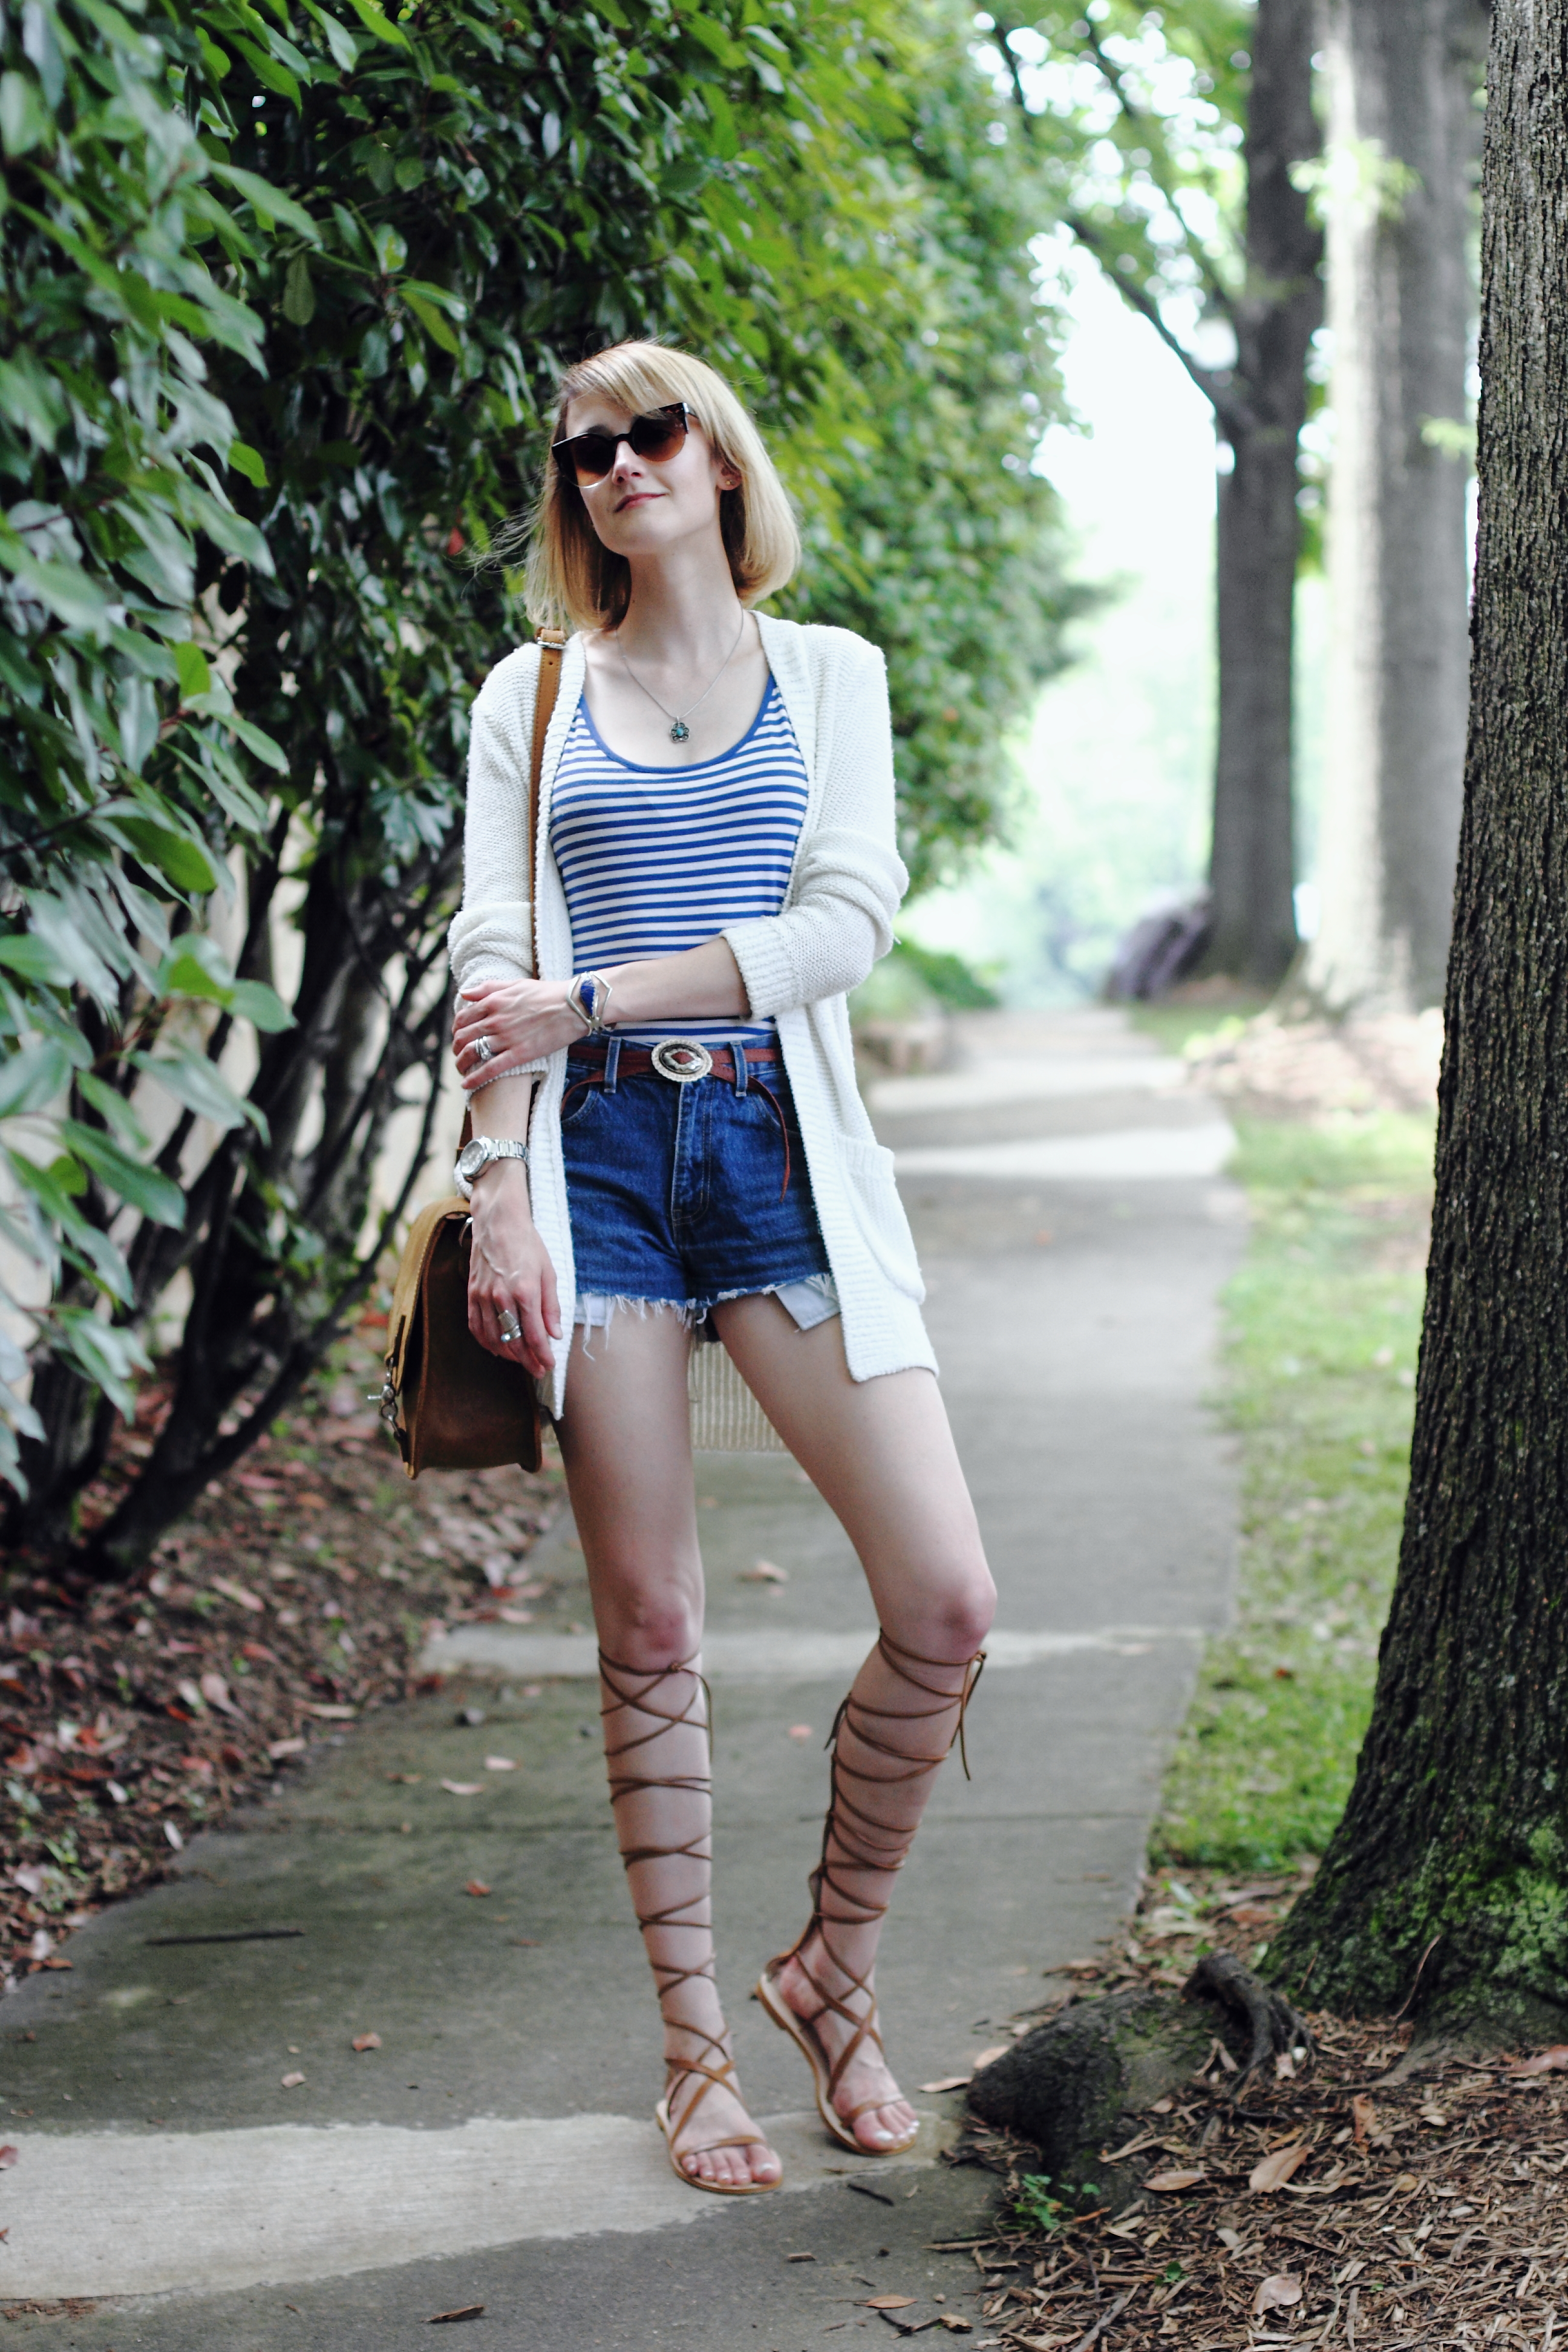 striped top, cut-offs, and lace-up gladiators